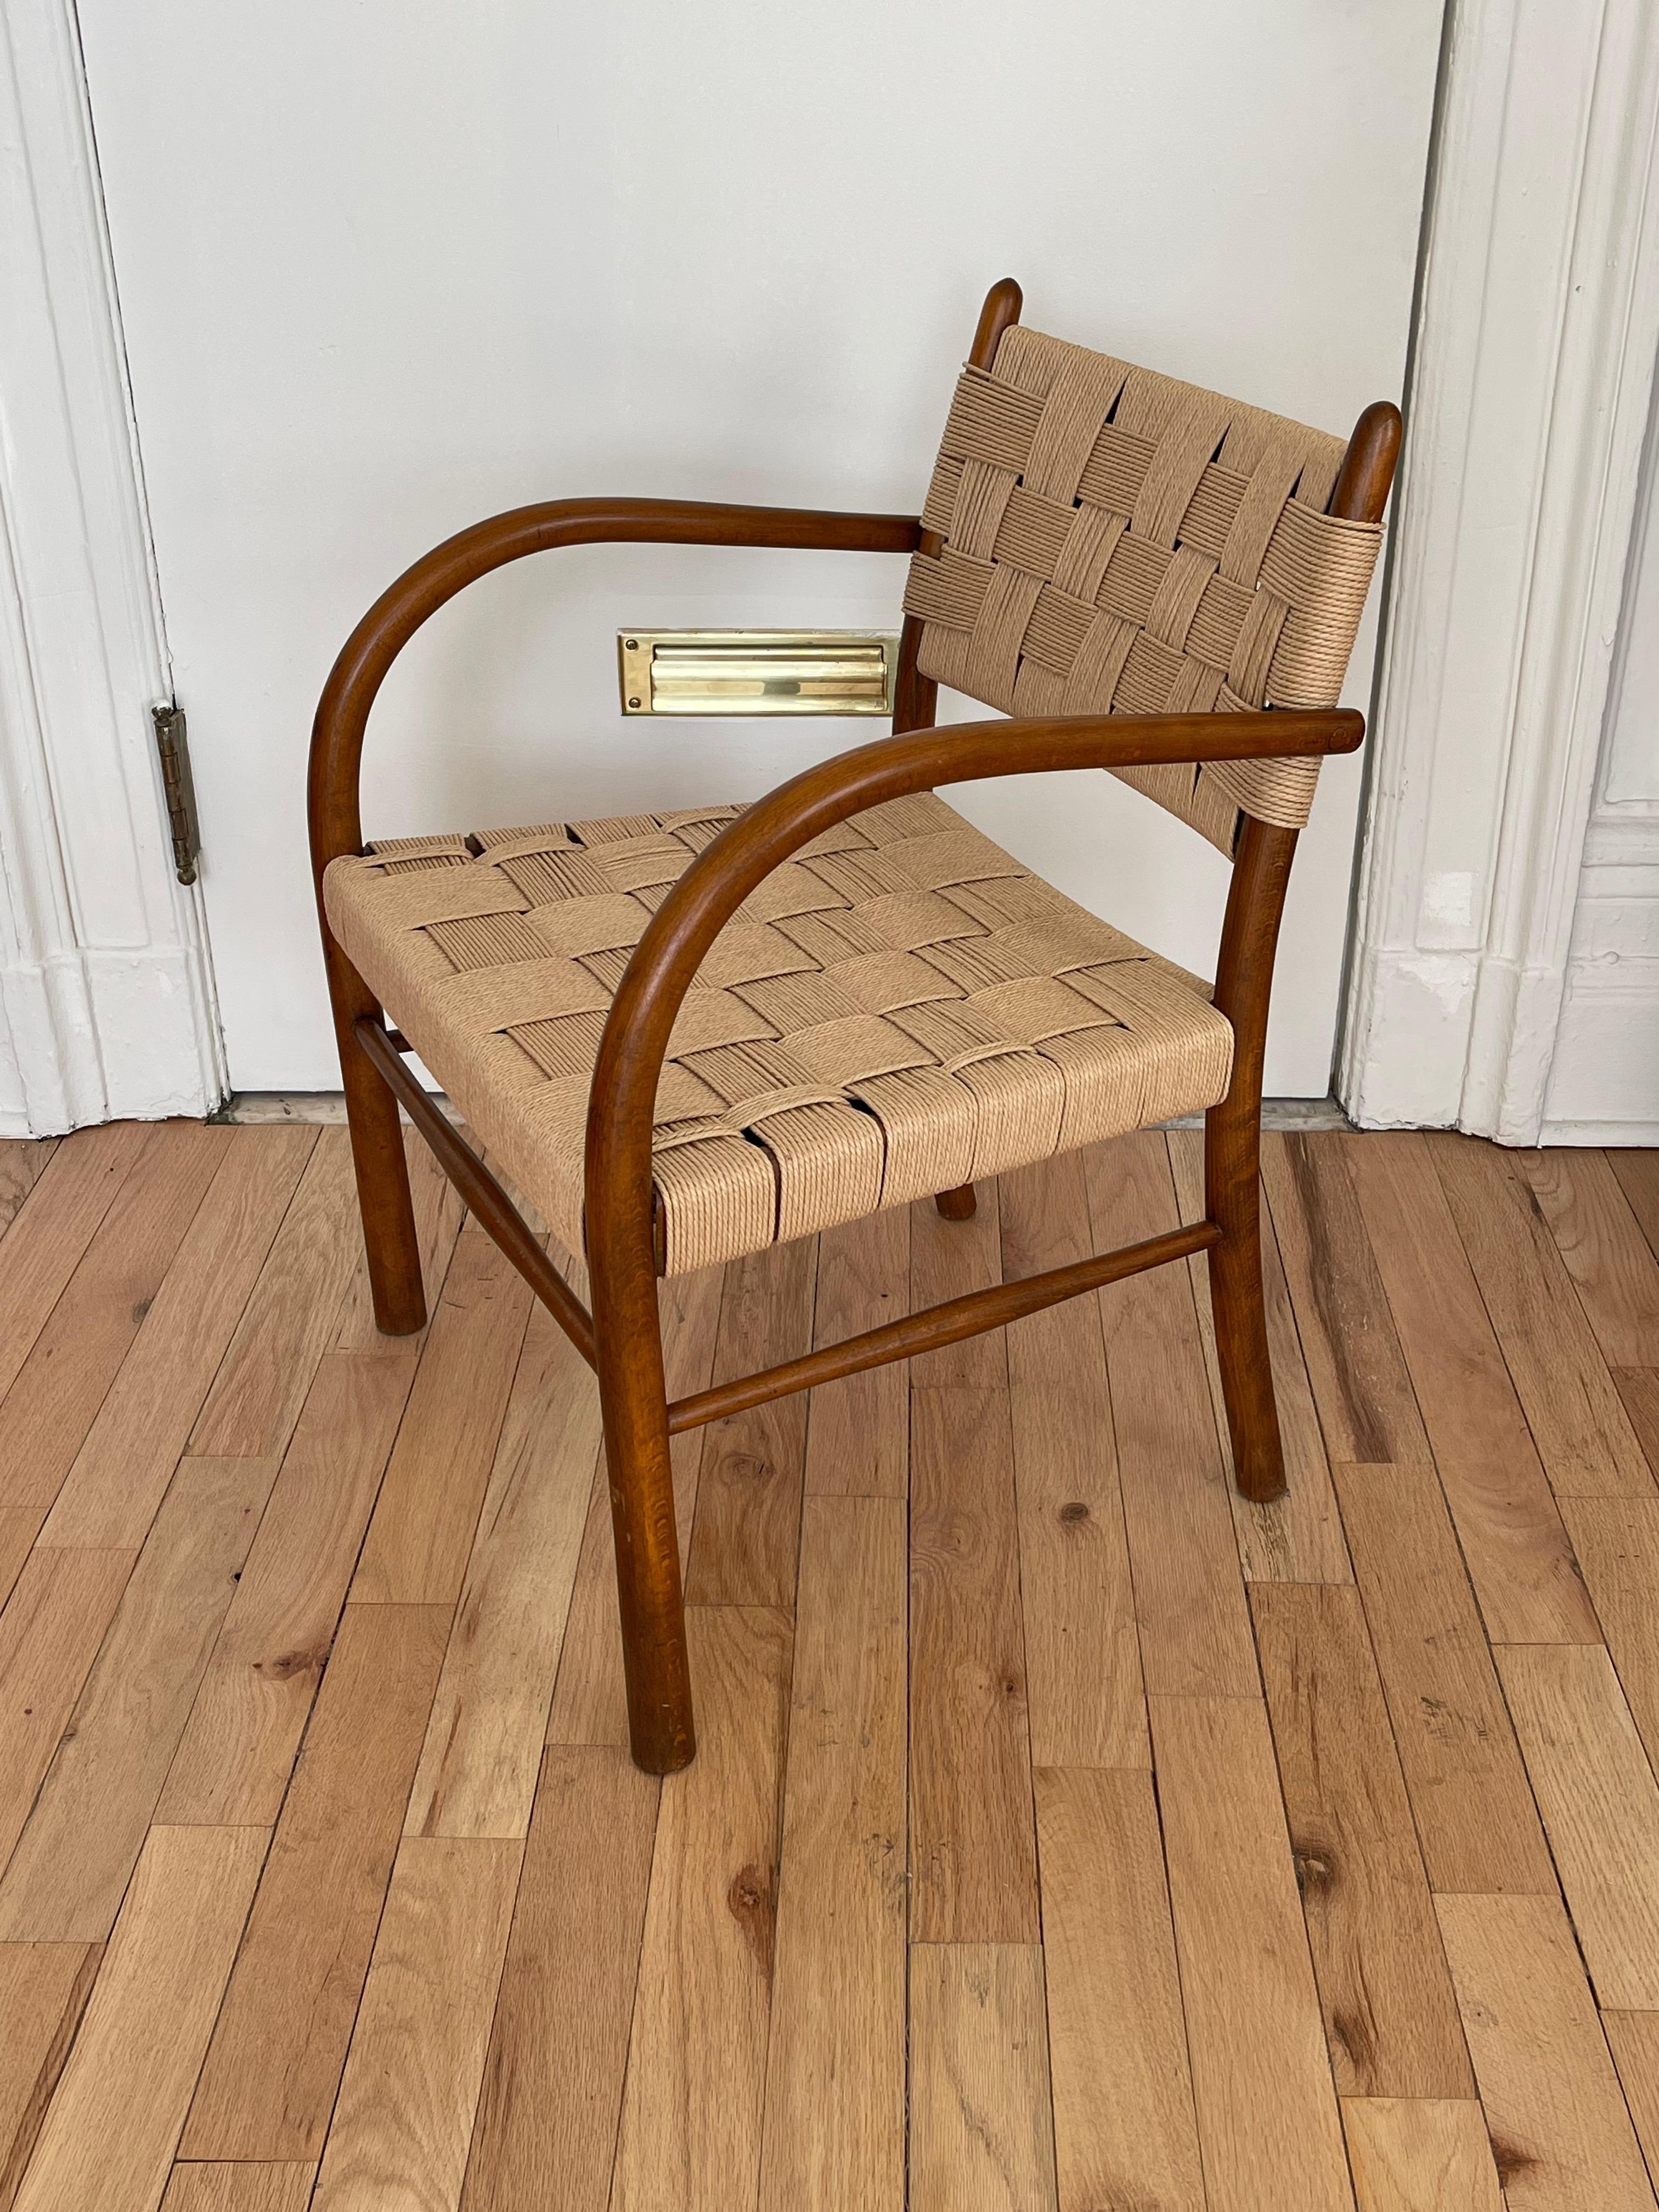 Manufactured by Fritz Hansen, 1938.

Restored beech armchair with woven papercord back and seat. This chair as well as other models have been commonly attributed to Frits Schlegel. However the original Fritz Hansen catalog from 1938 reveals that